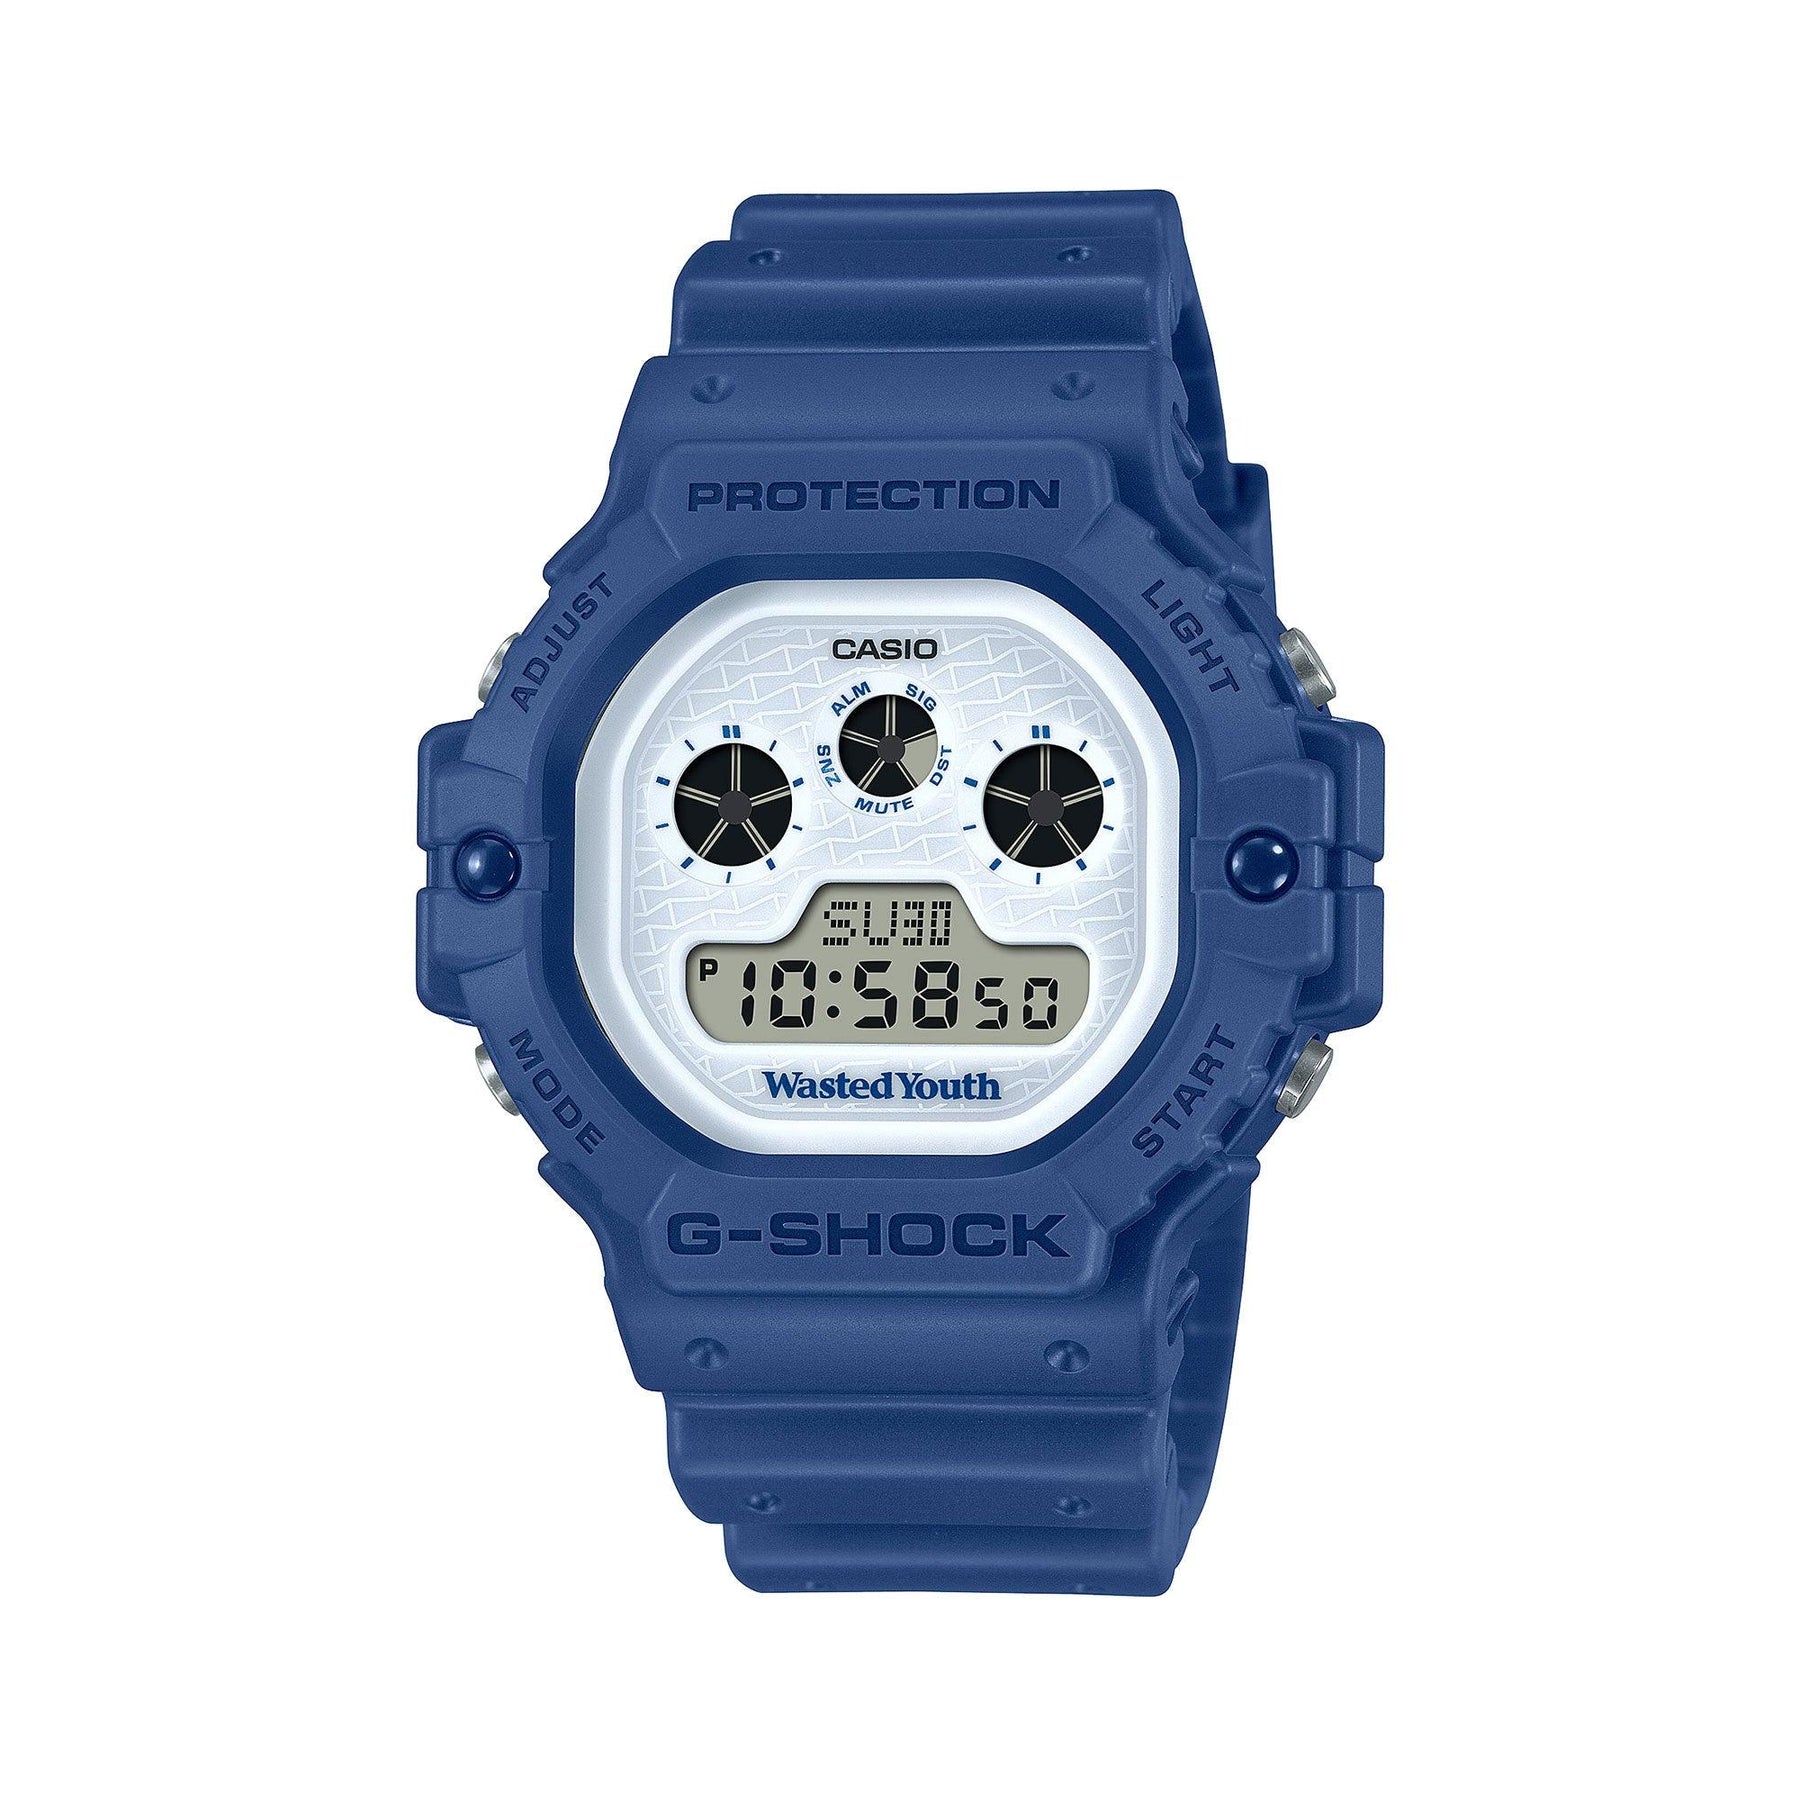 Casio X Wasted Youth G-Shock Watch DW-5900WY-2 - Wallace Bishop